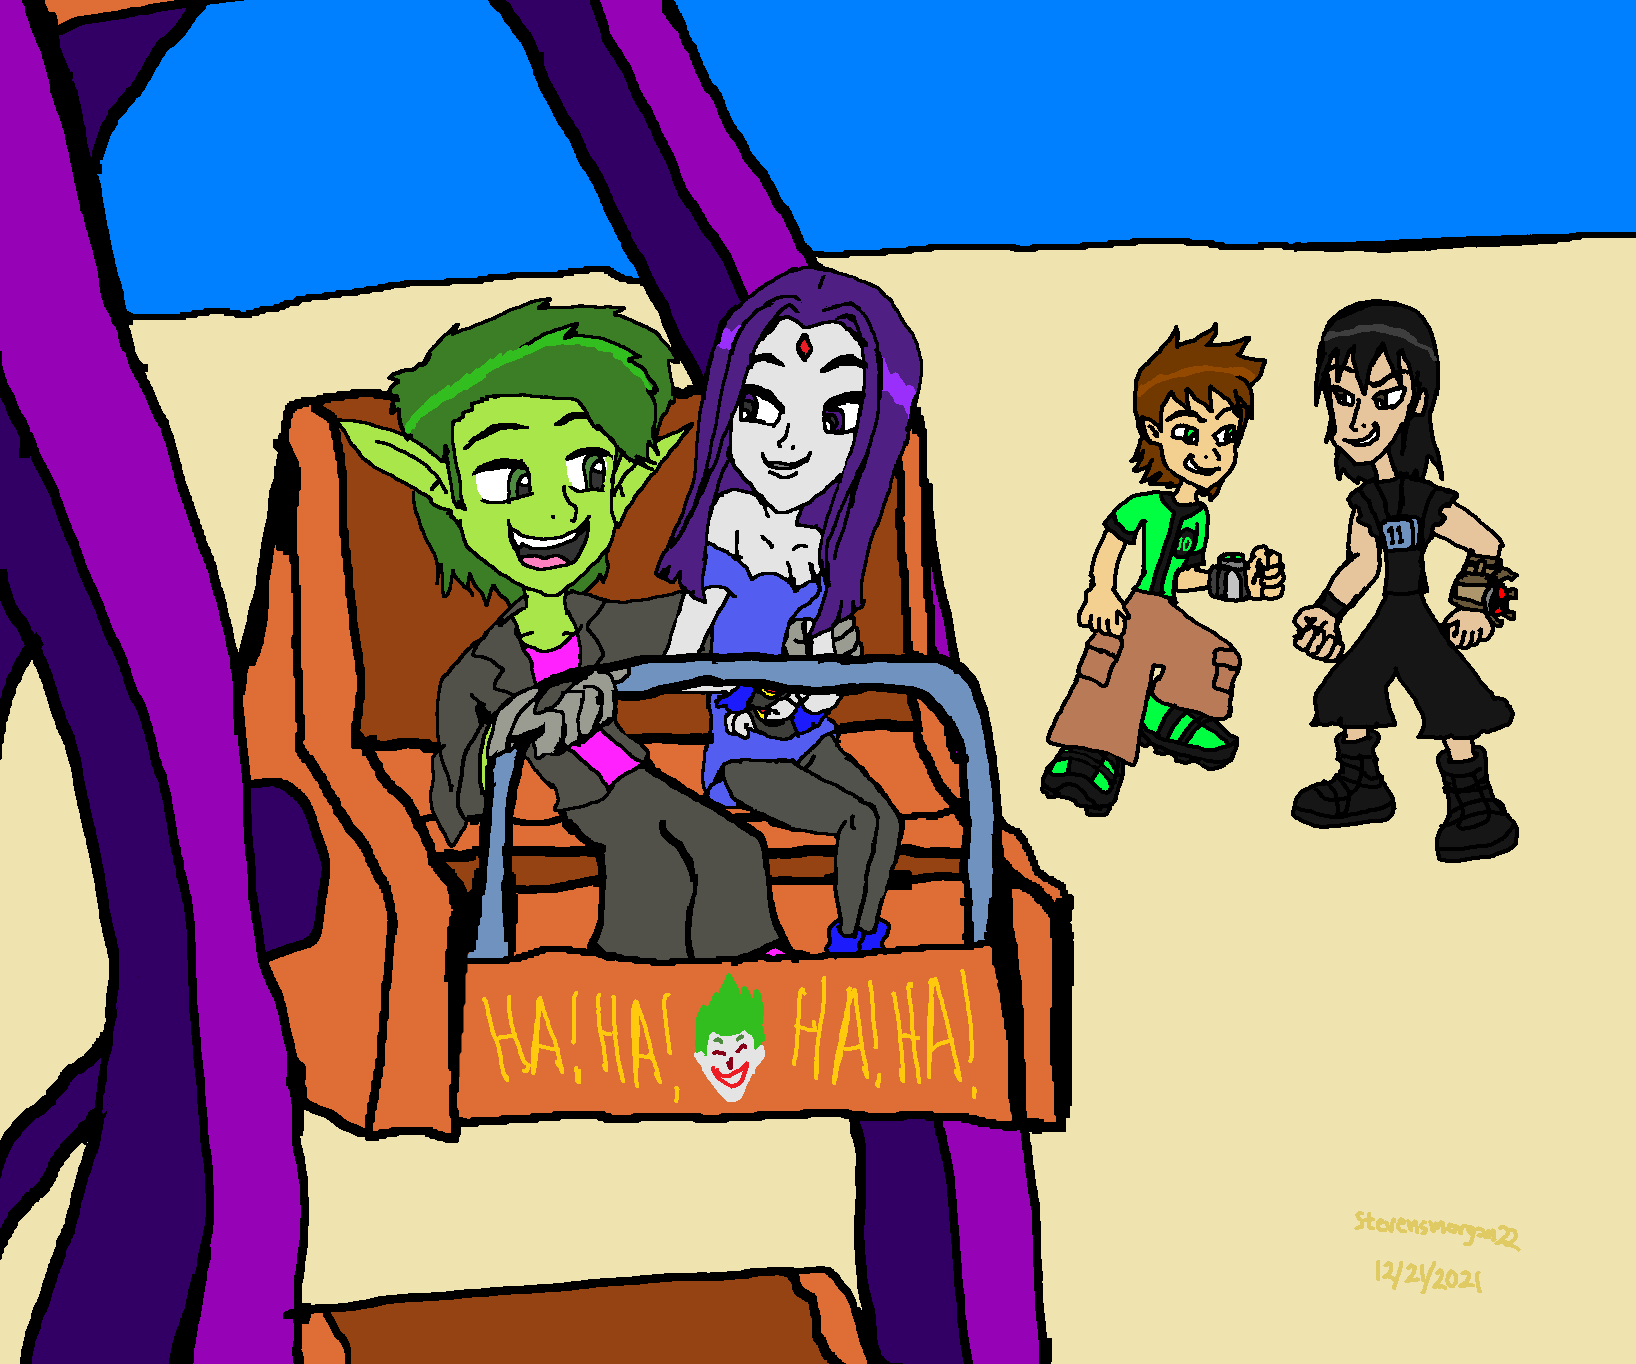 Beastboy x Raven with the Cameo Ben Tennyson 10 vs Kevin Ethan Levin 11